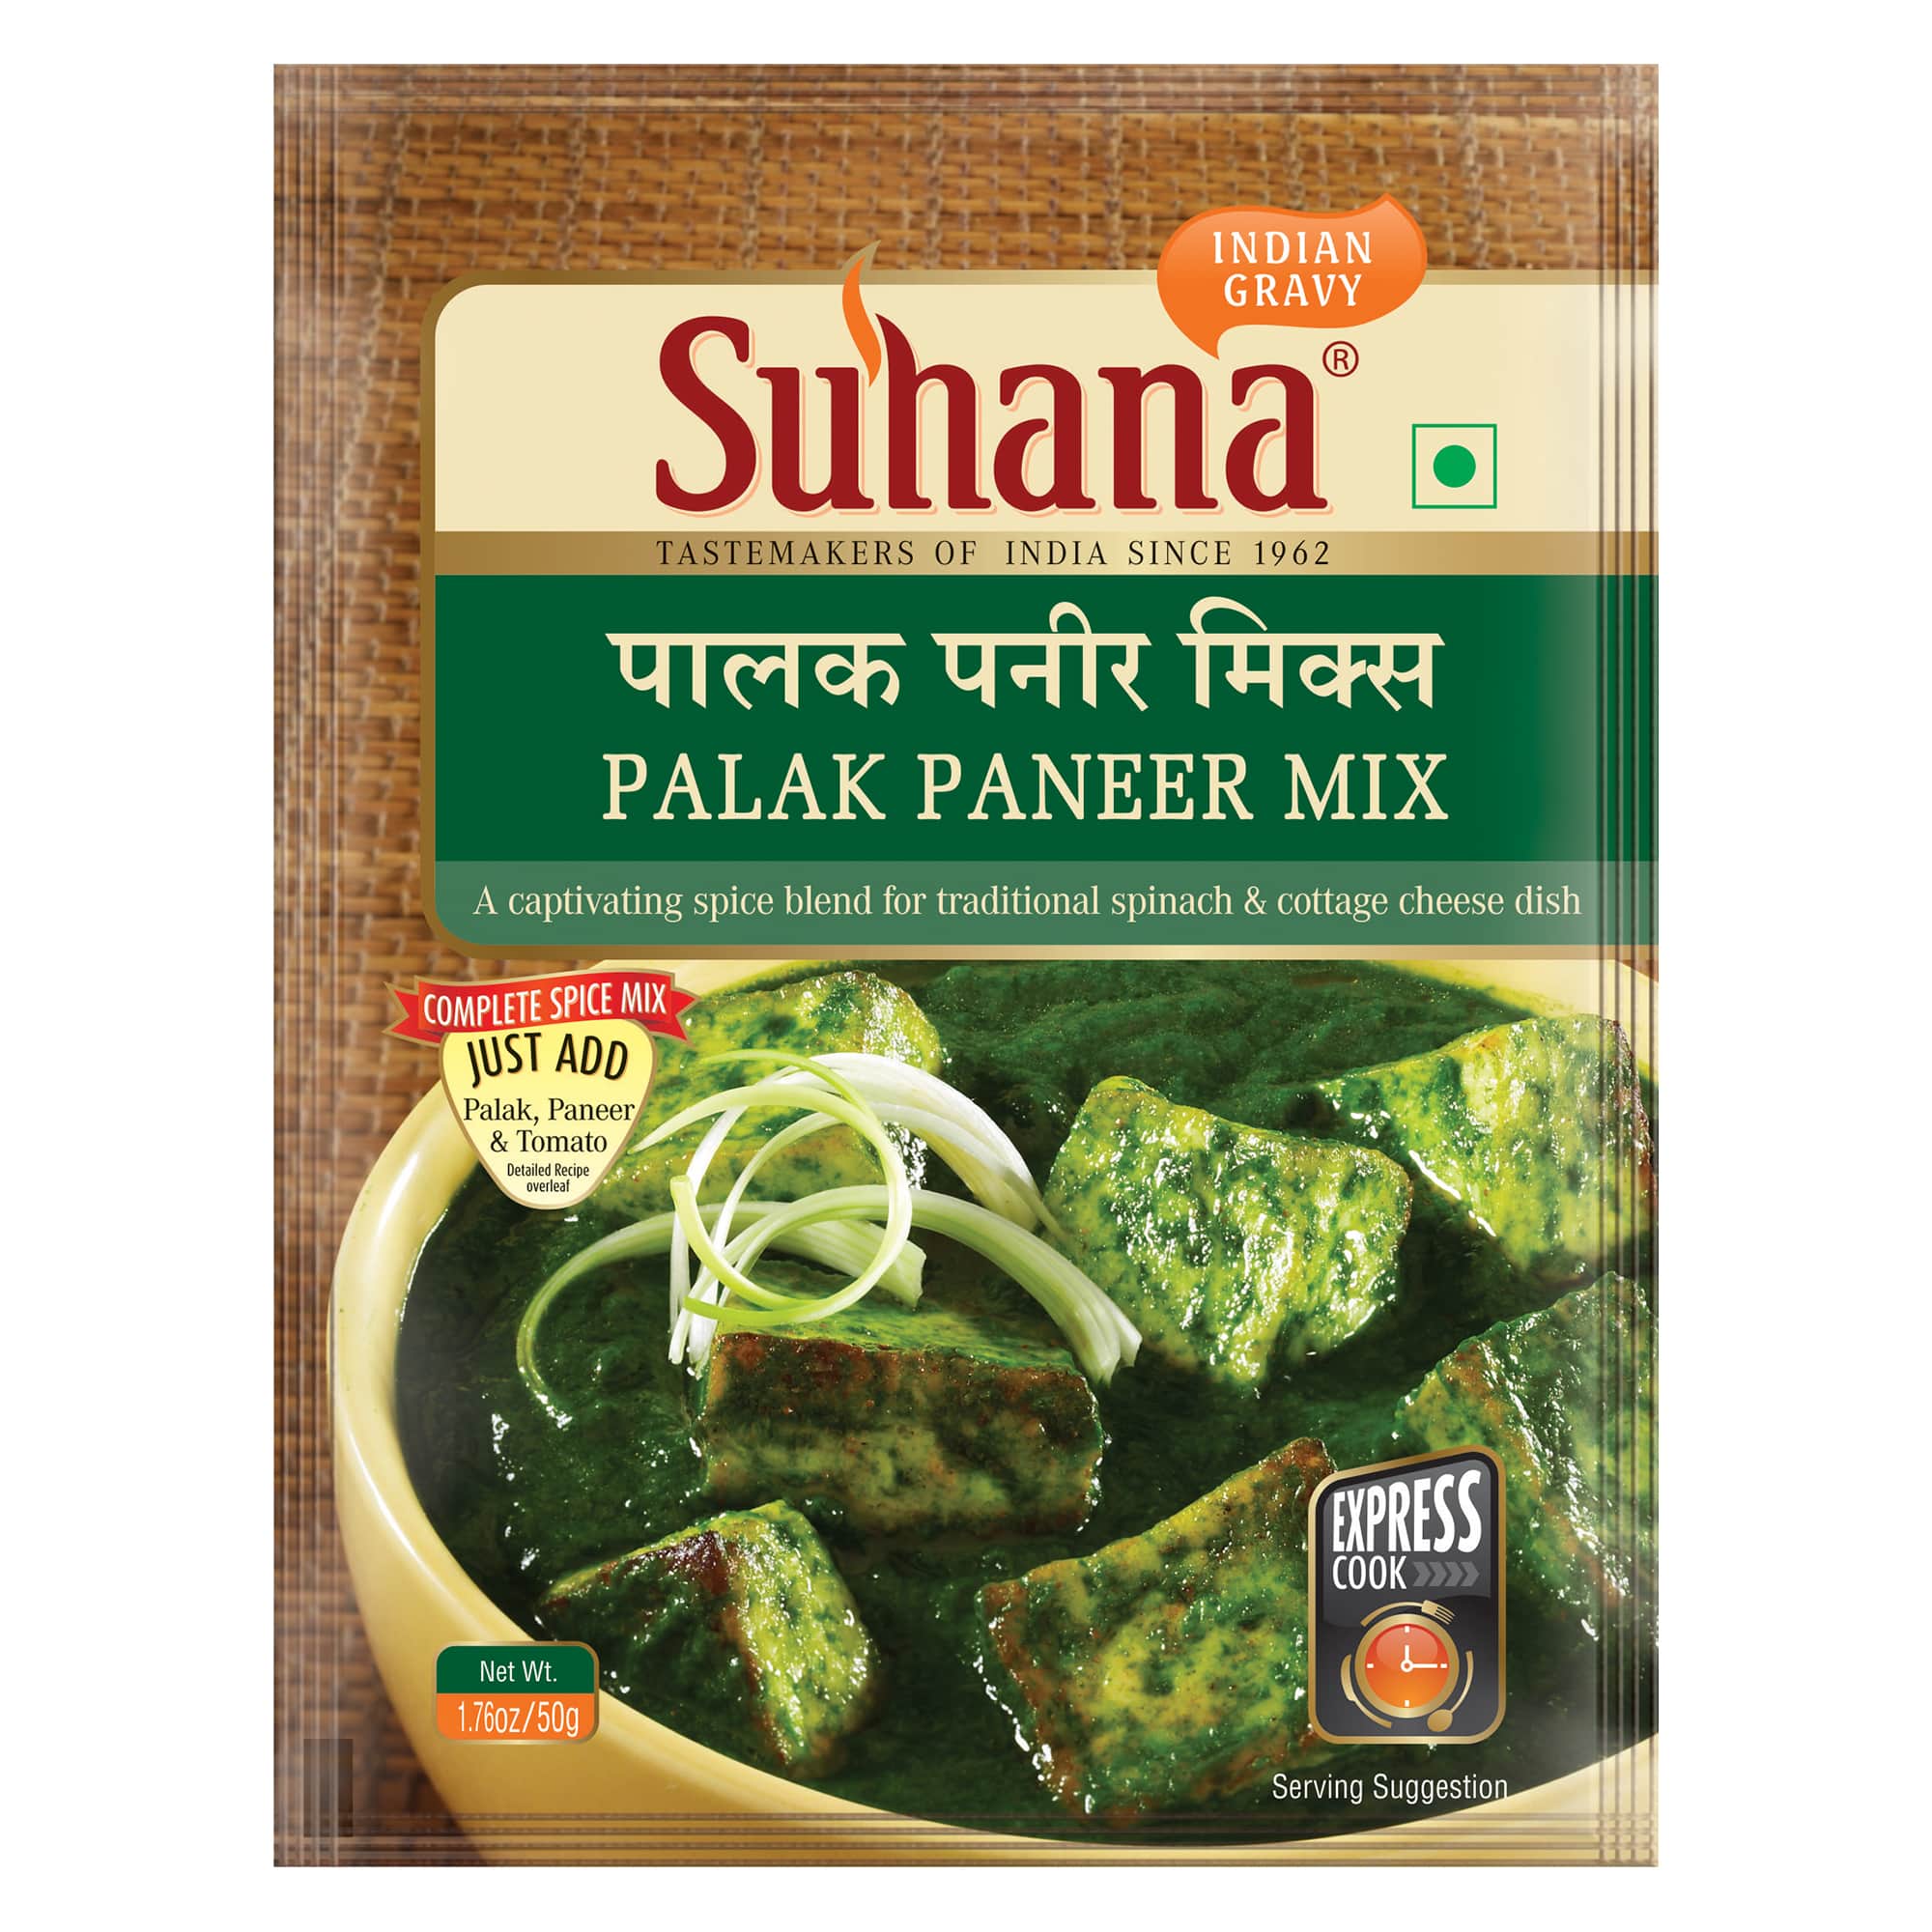 Suhana Palak Paneer Spice Mix 50g Pouch